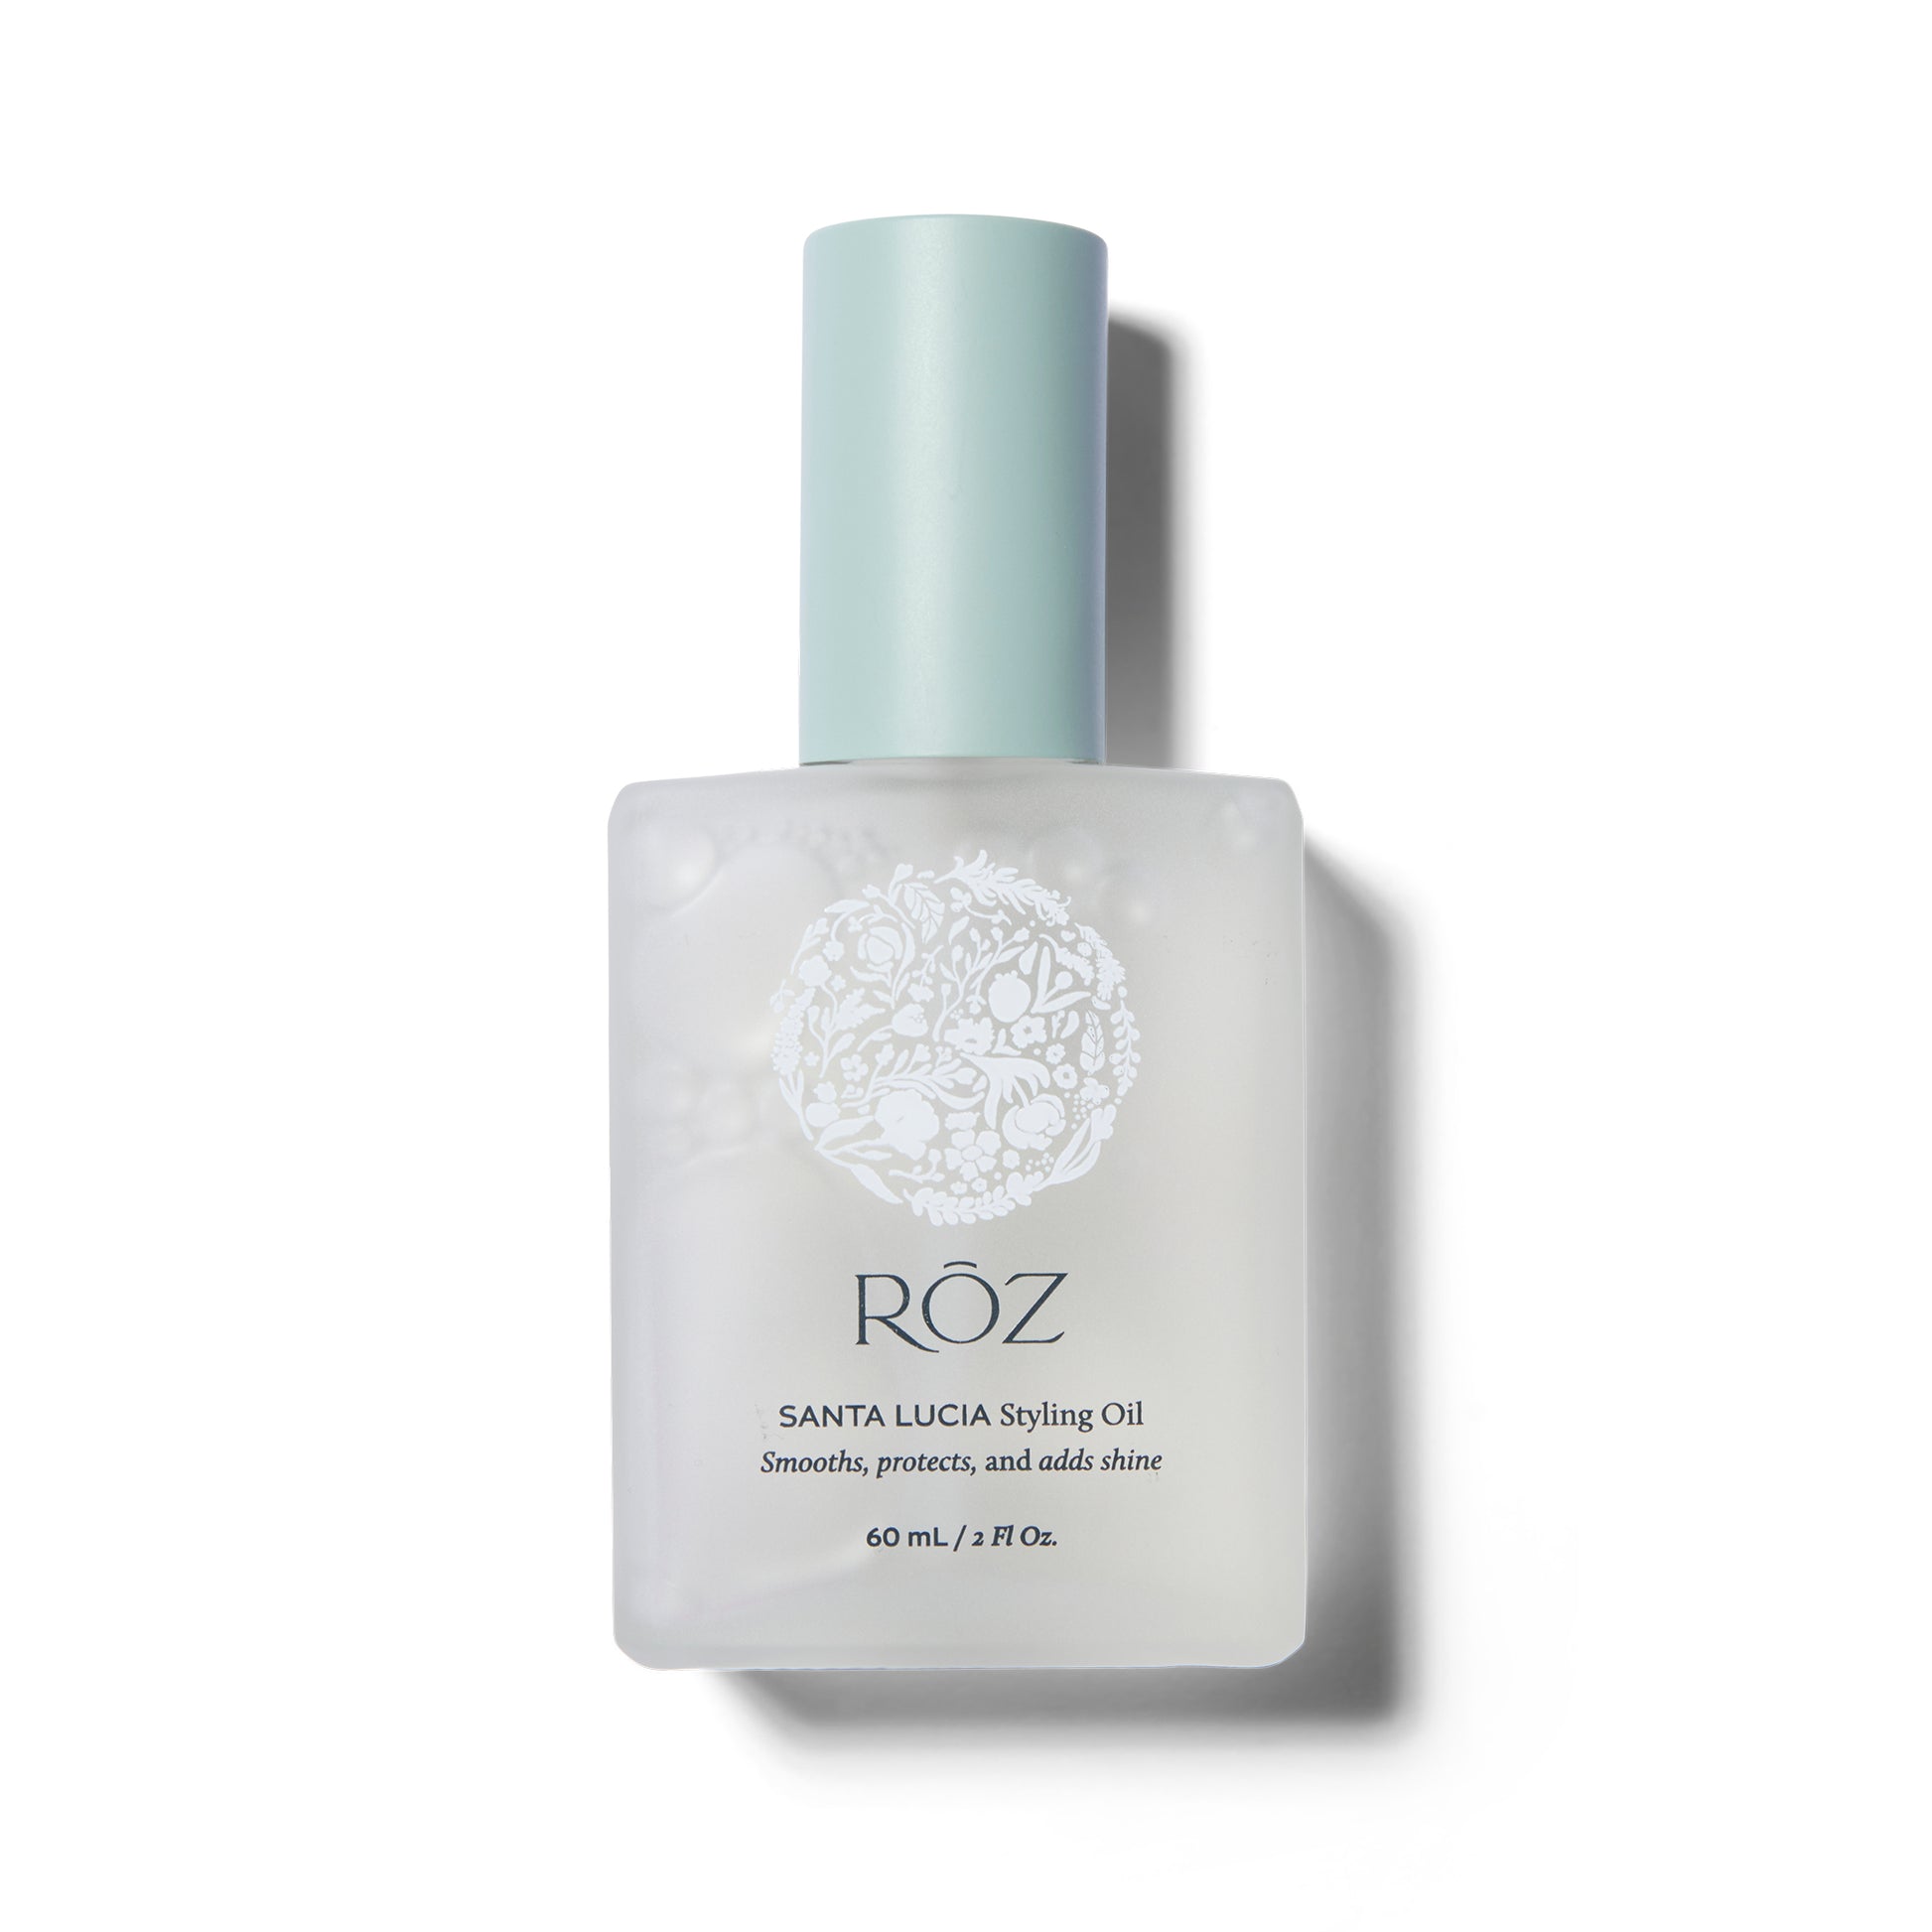 Front view of the ROZ Santa Lucia Styling Oil. The white frosted bottle has a pale blue cap. The cap is on.